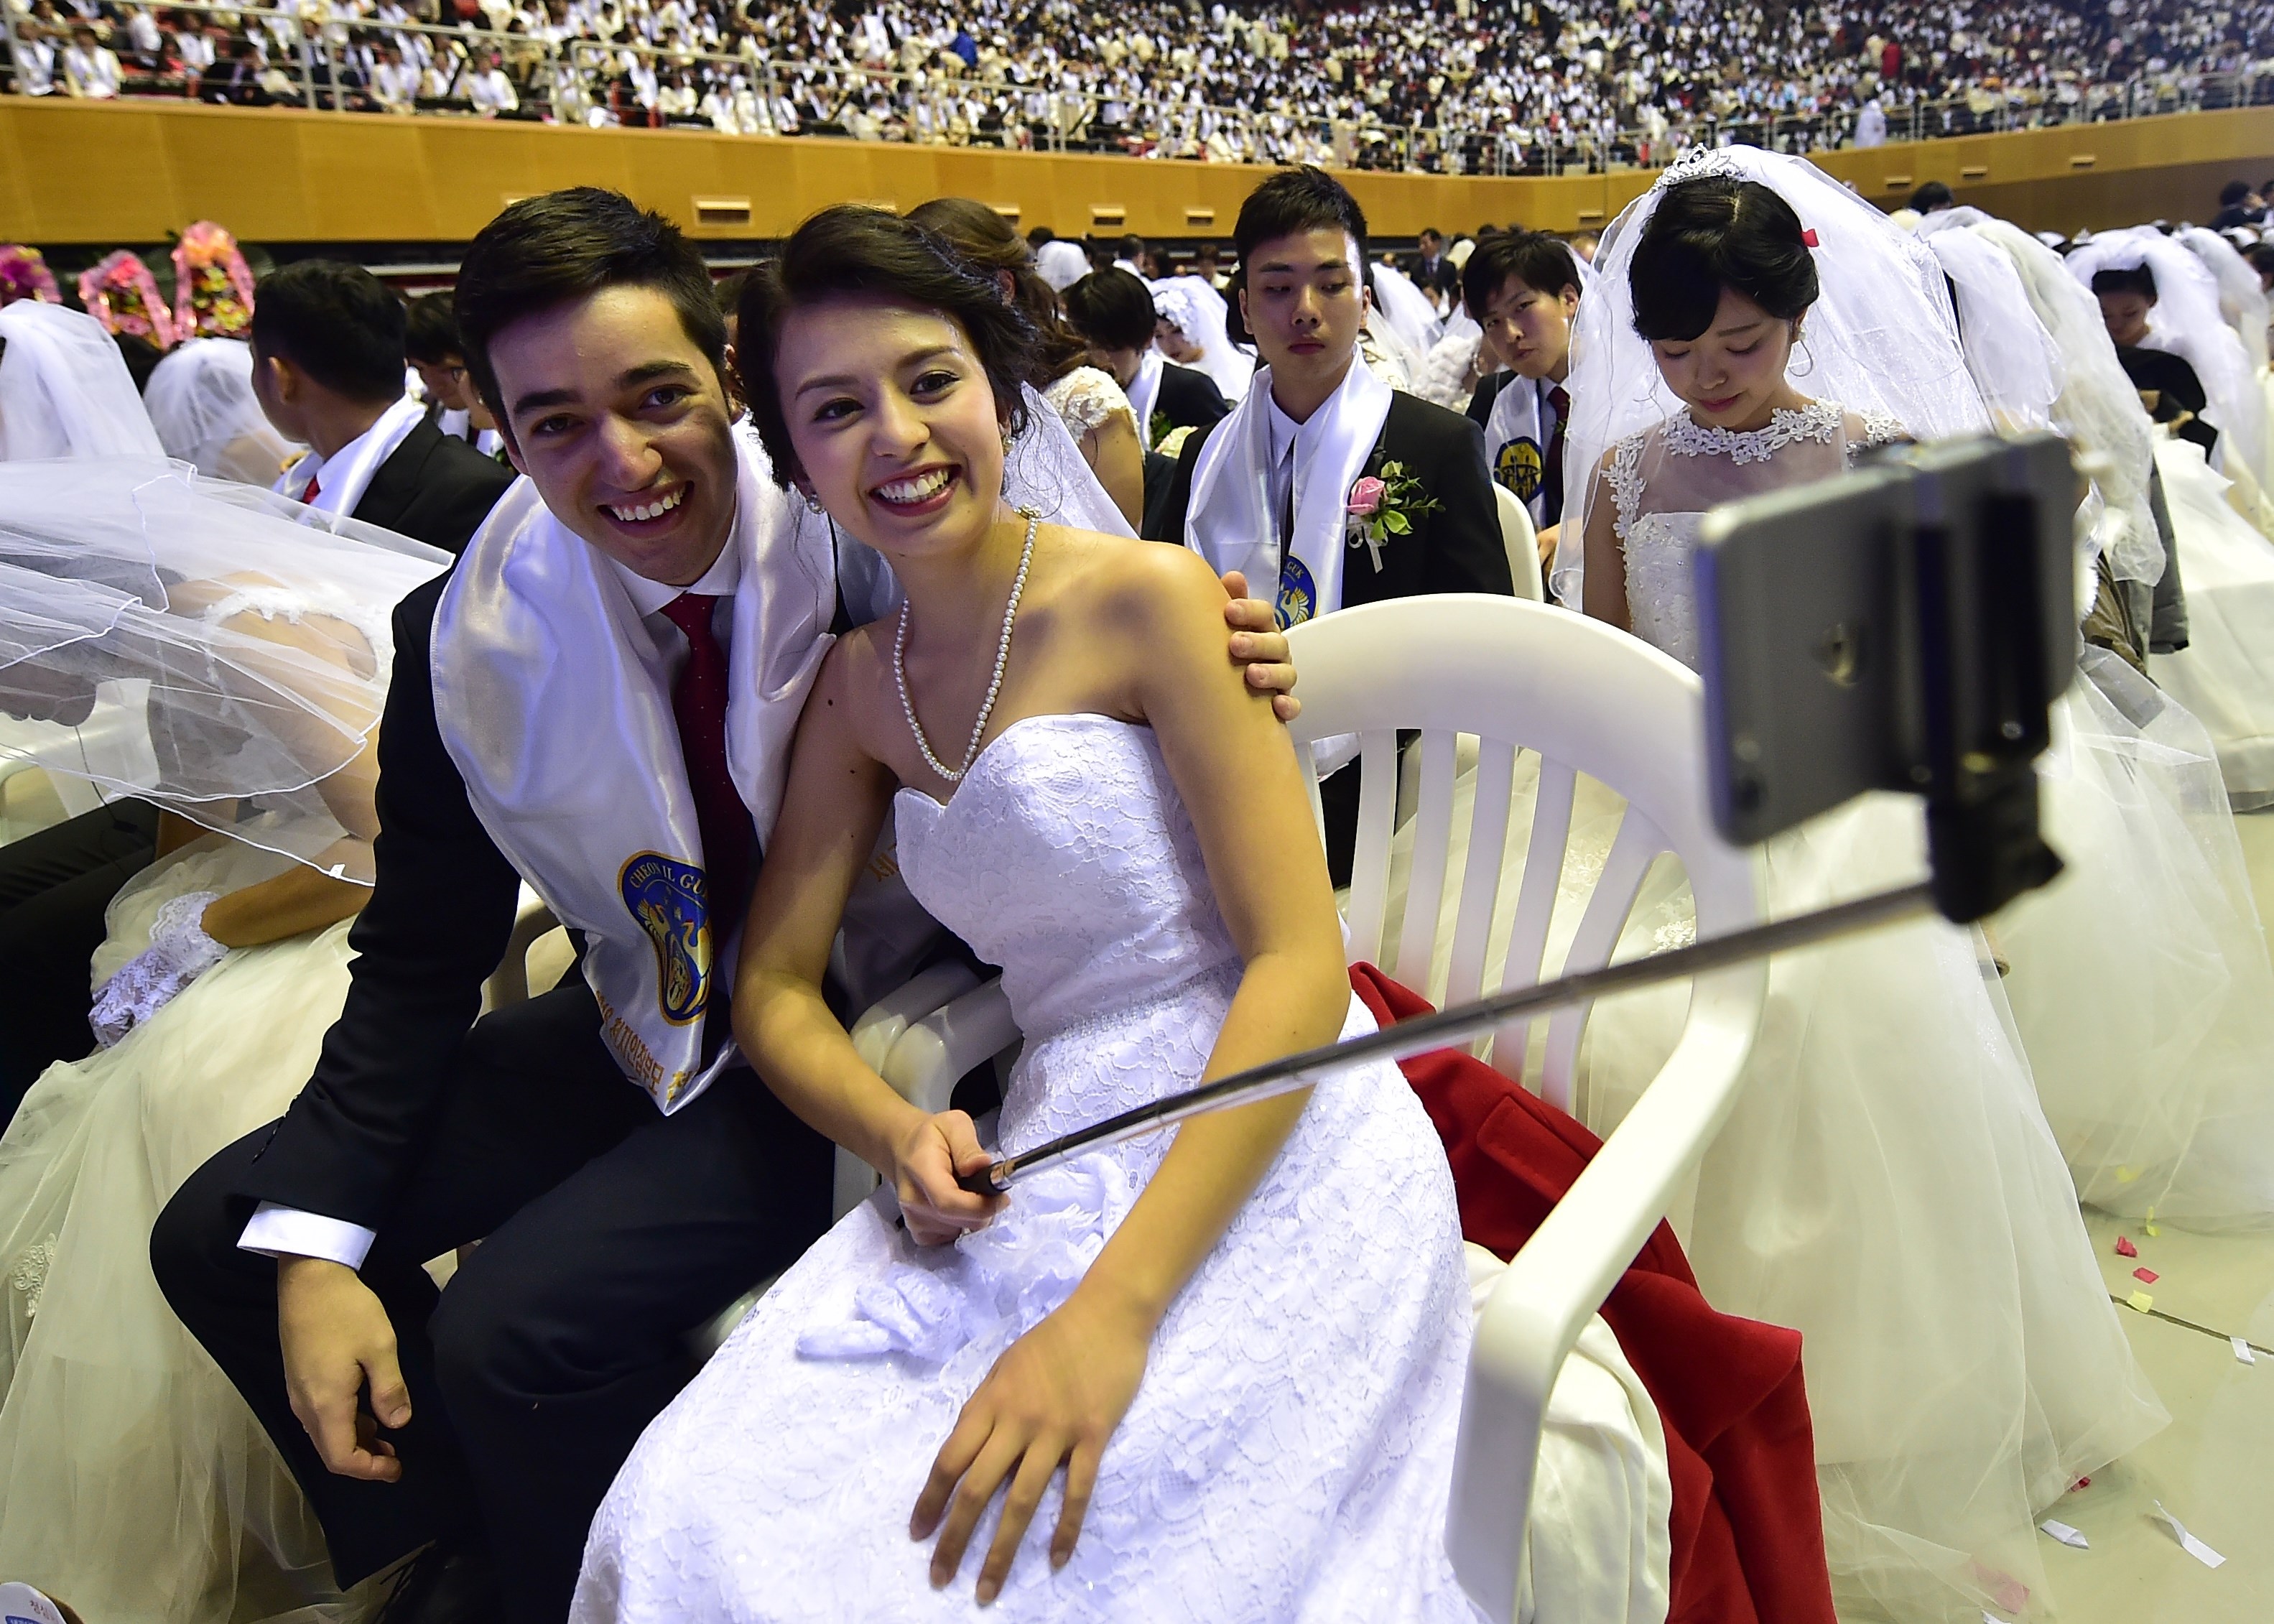 A couple take a selfie during a mass wedding held by the Unification Church at Cheongshim Peace World Center in Gapyeong, east of Seoul, on February 20, 2016. Hundreds of couples were married at the South Korean headquarters of the Unification Church. The Unification Church, set up by Sun Myung Moon in Seoul in 1954, is one of the world's most controversial religious organisations, and its devotees are often dubbed "Moonies" after the founder. AFP PHOTO / JUNG YEON-JE SKOREA--RELIGION-UNIFICATION-MARRIAGE